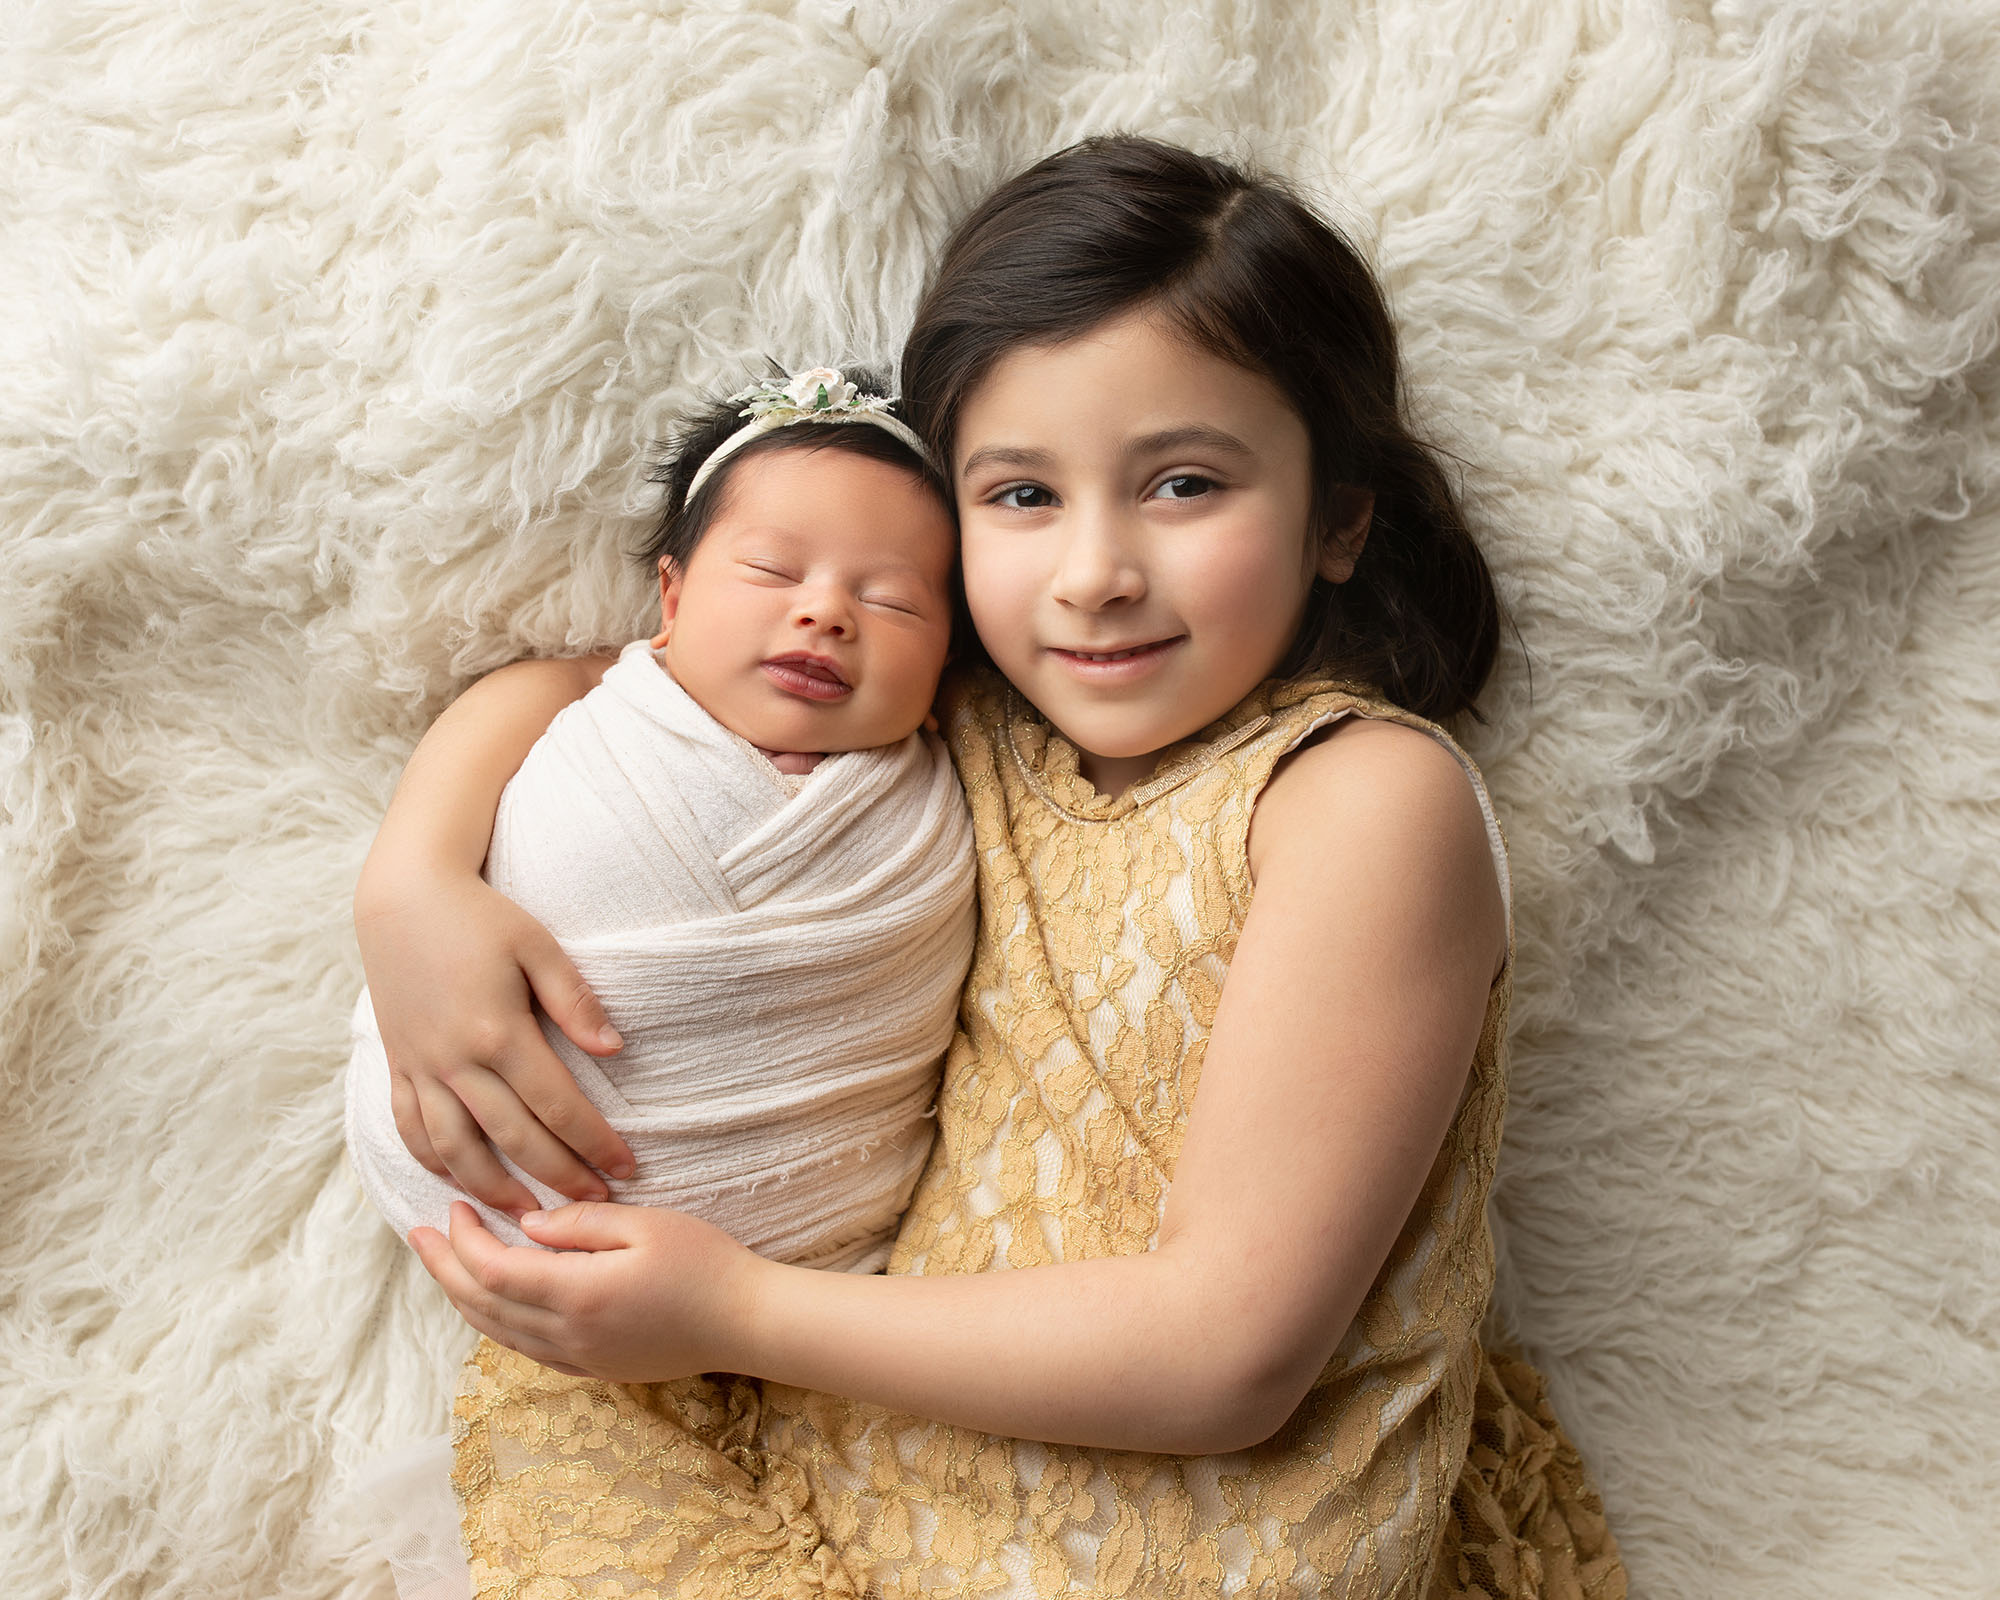 Newborn baby and sister posing together 